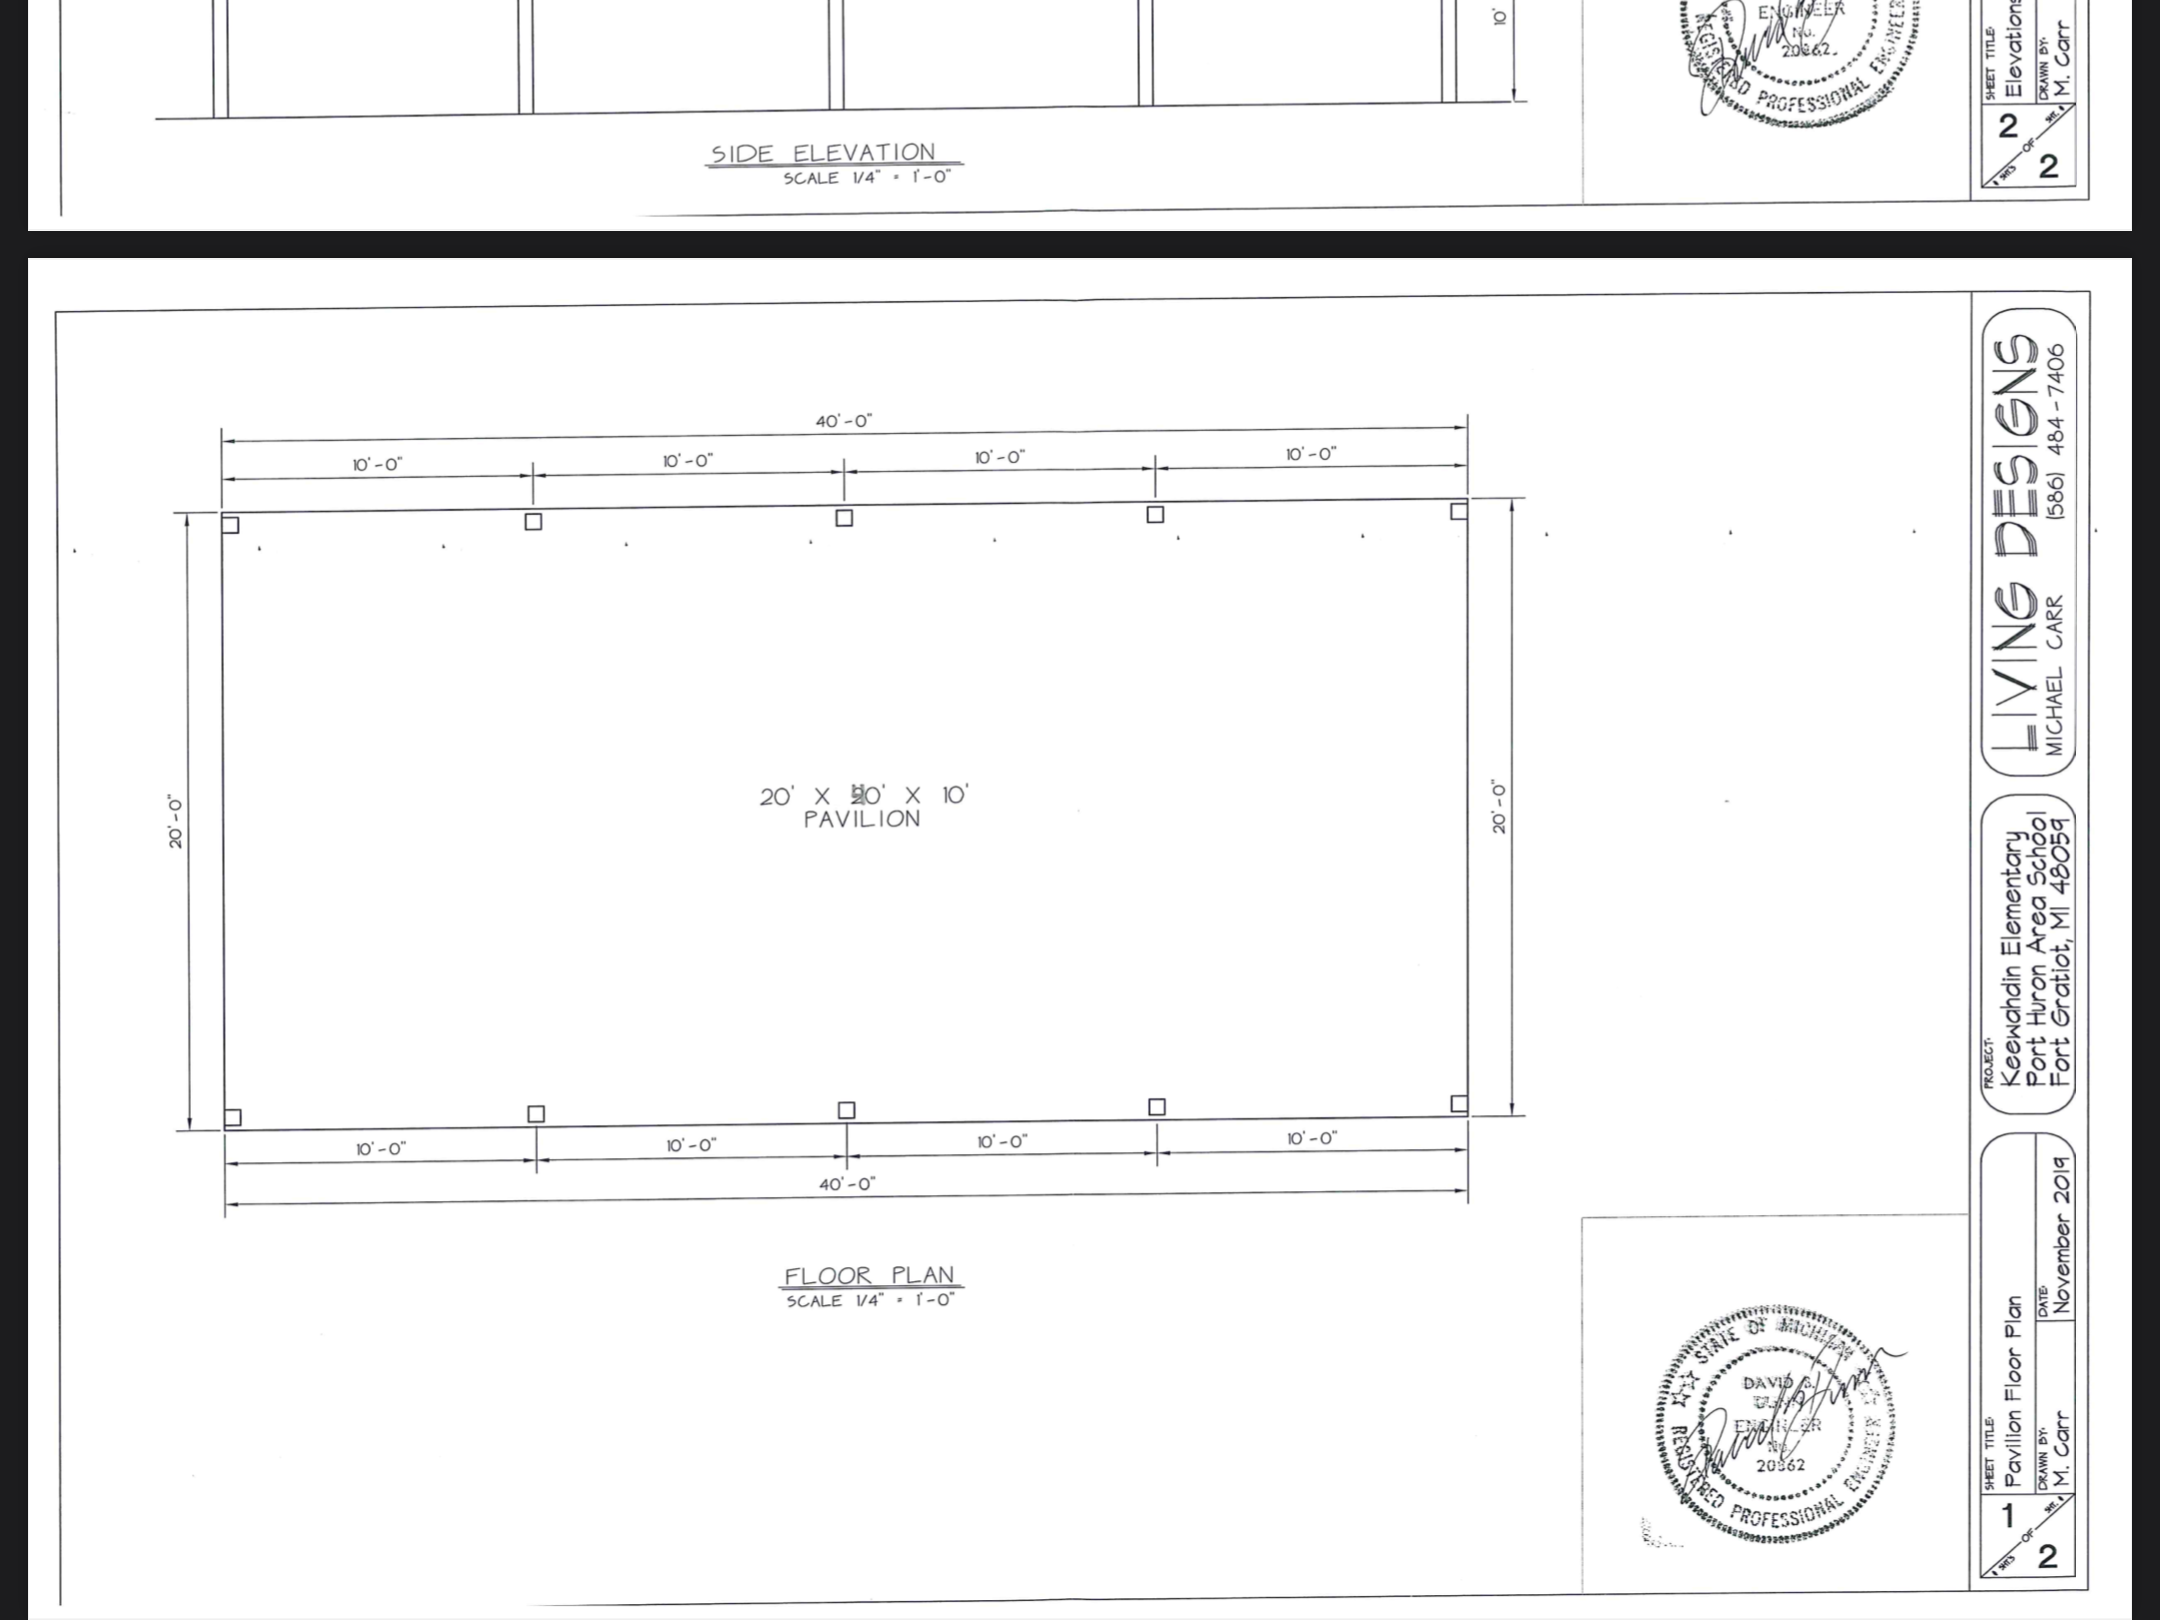 Blueprints for the outdoor learning center